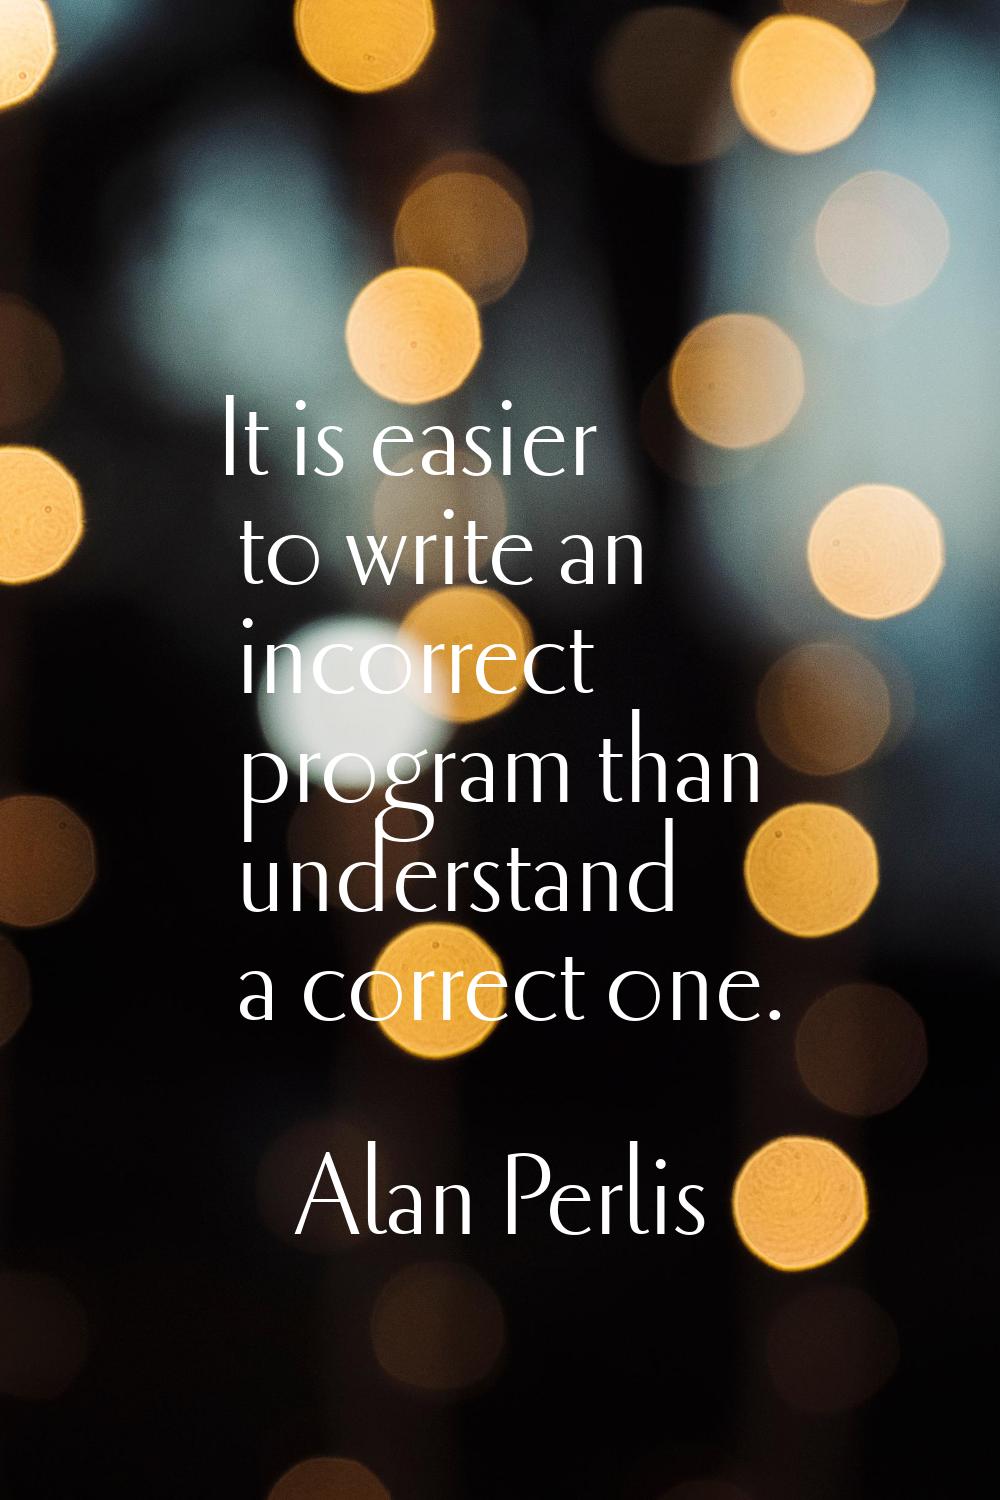 It is easier to write an incorrect program than understand a correct one.